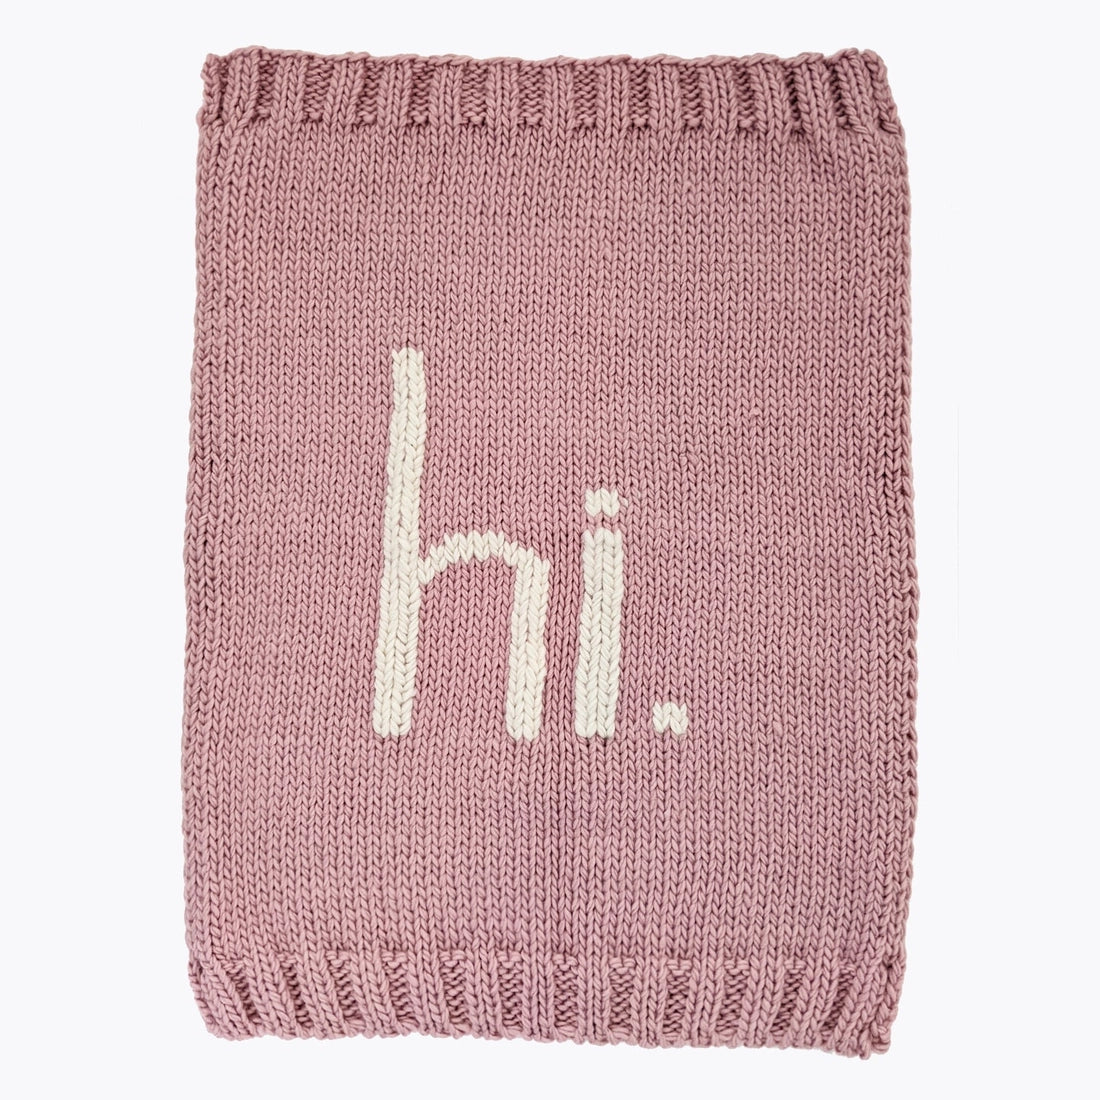 hi. Hand Knit Baby Blanket Rosy Pink Ships